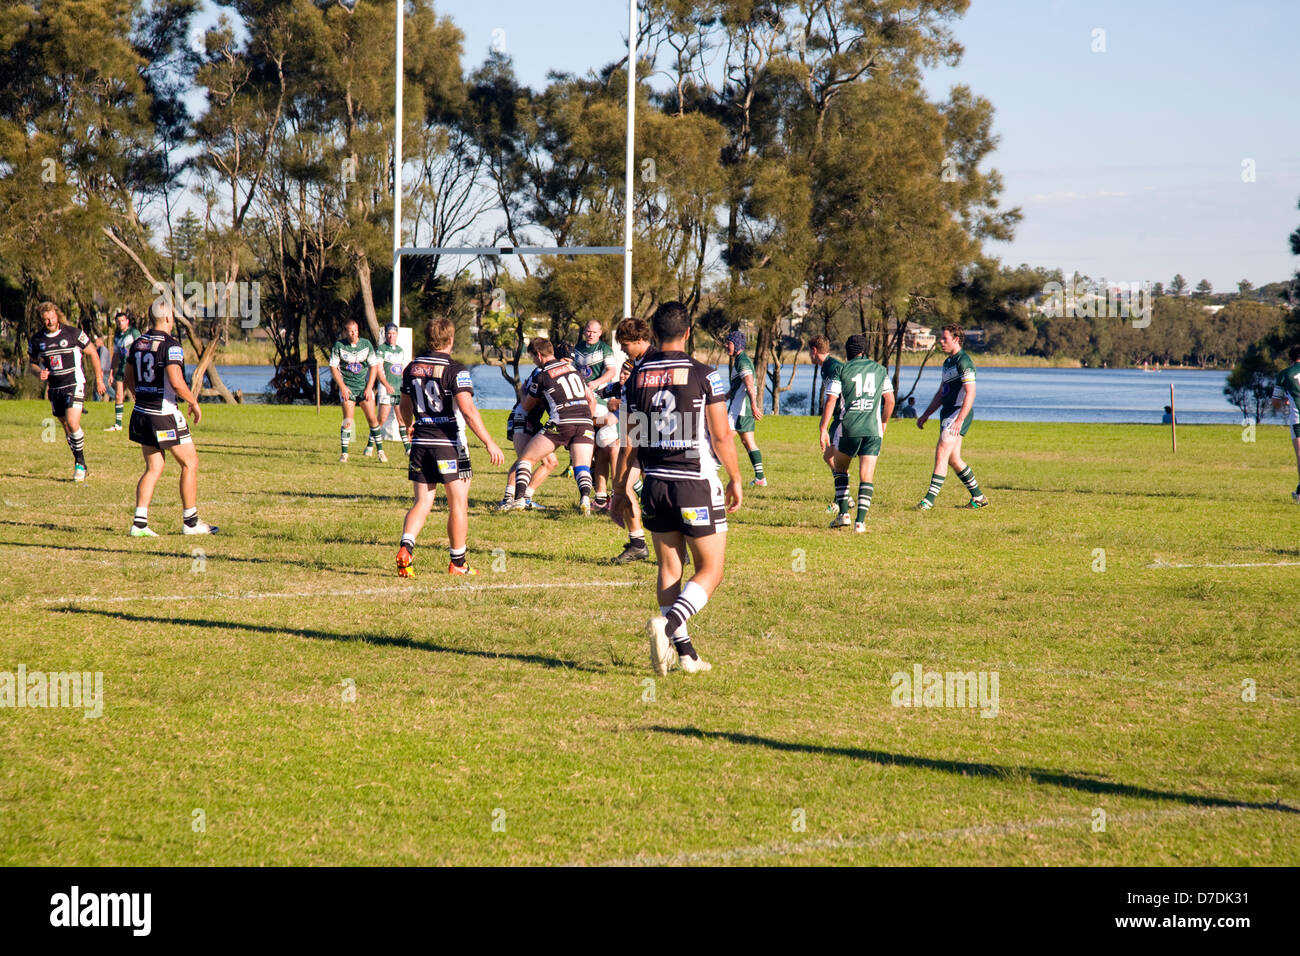 Australian rugby league game being played in Sydney,Australia Stock Photo